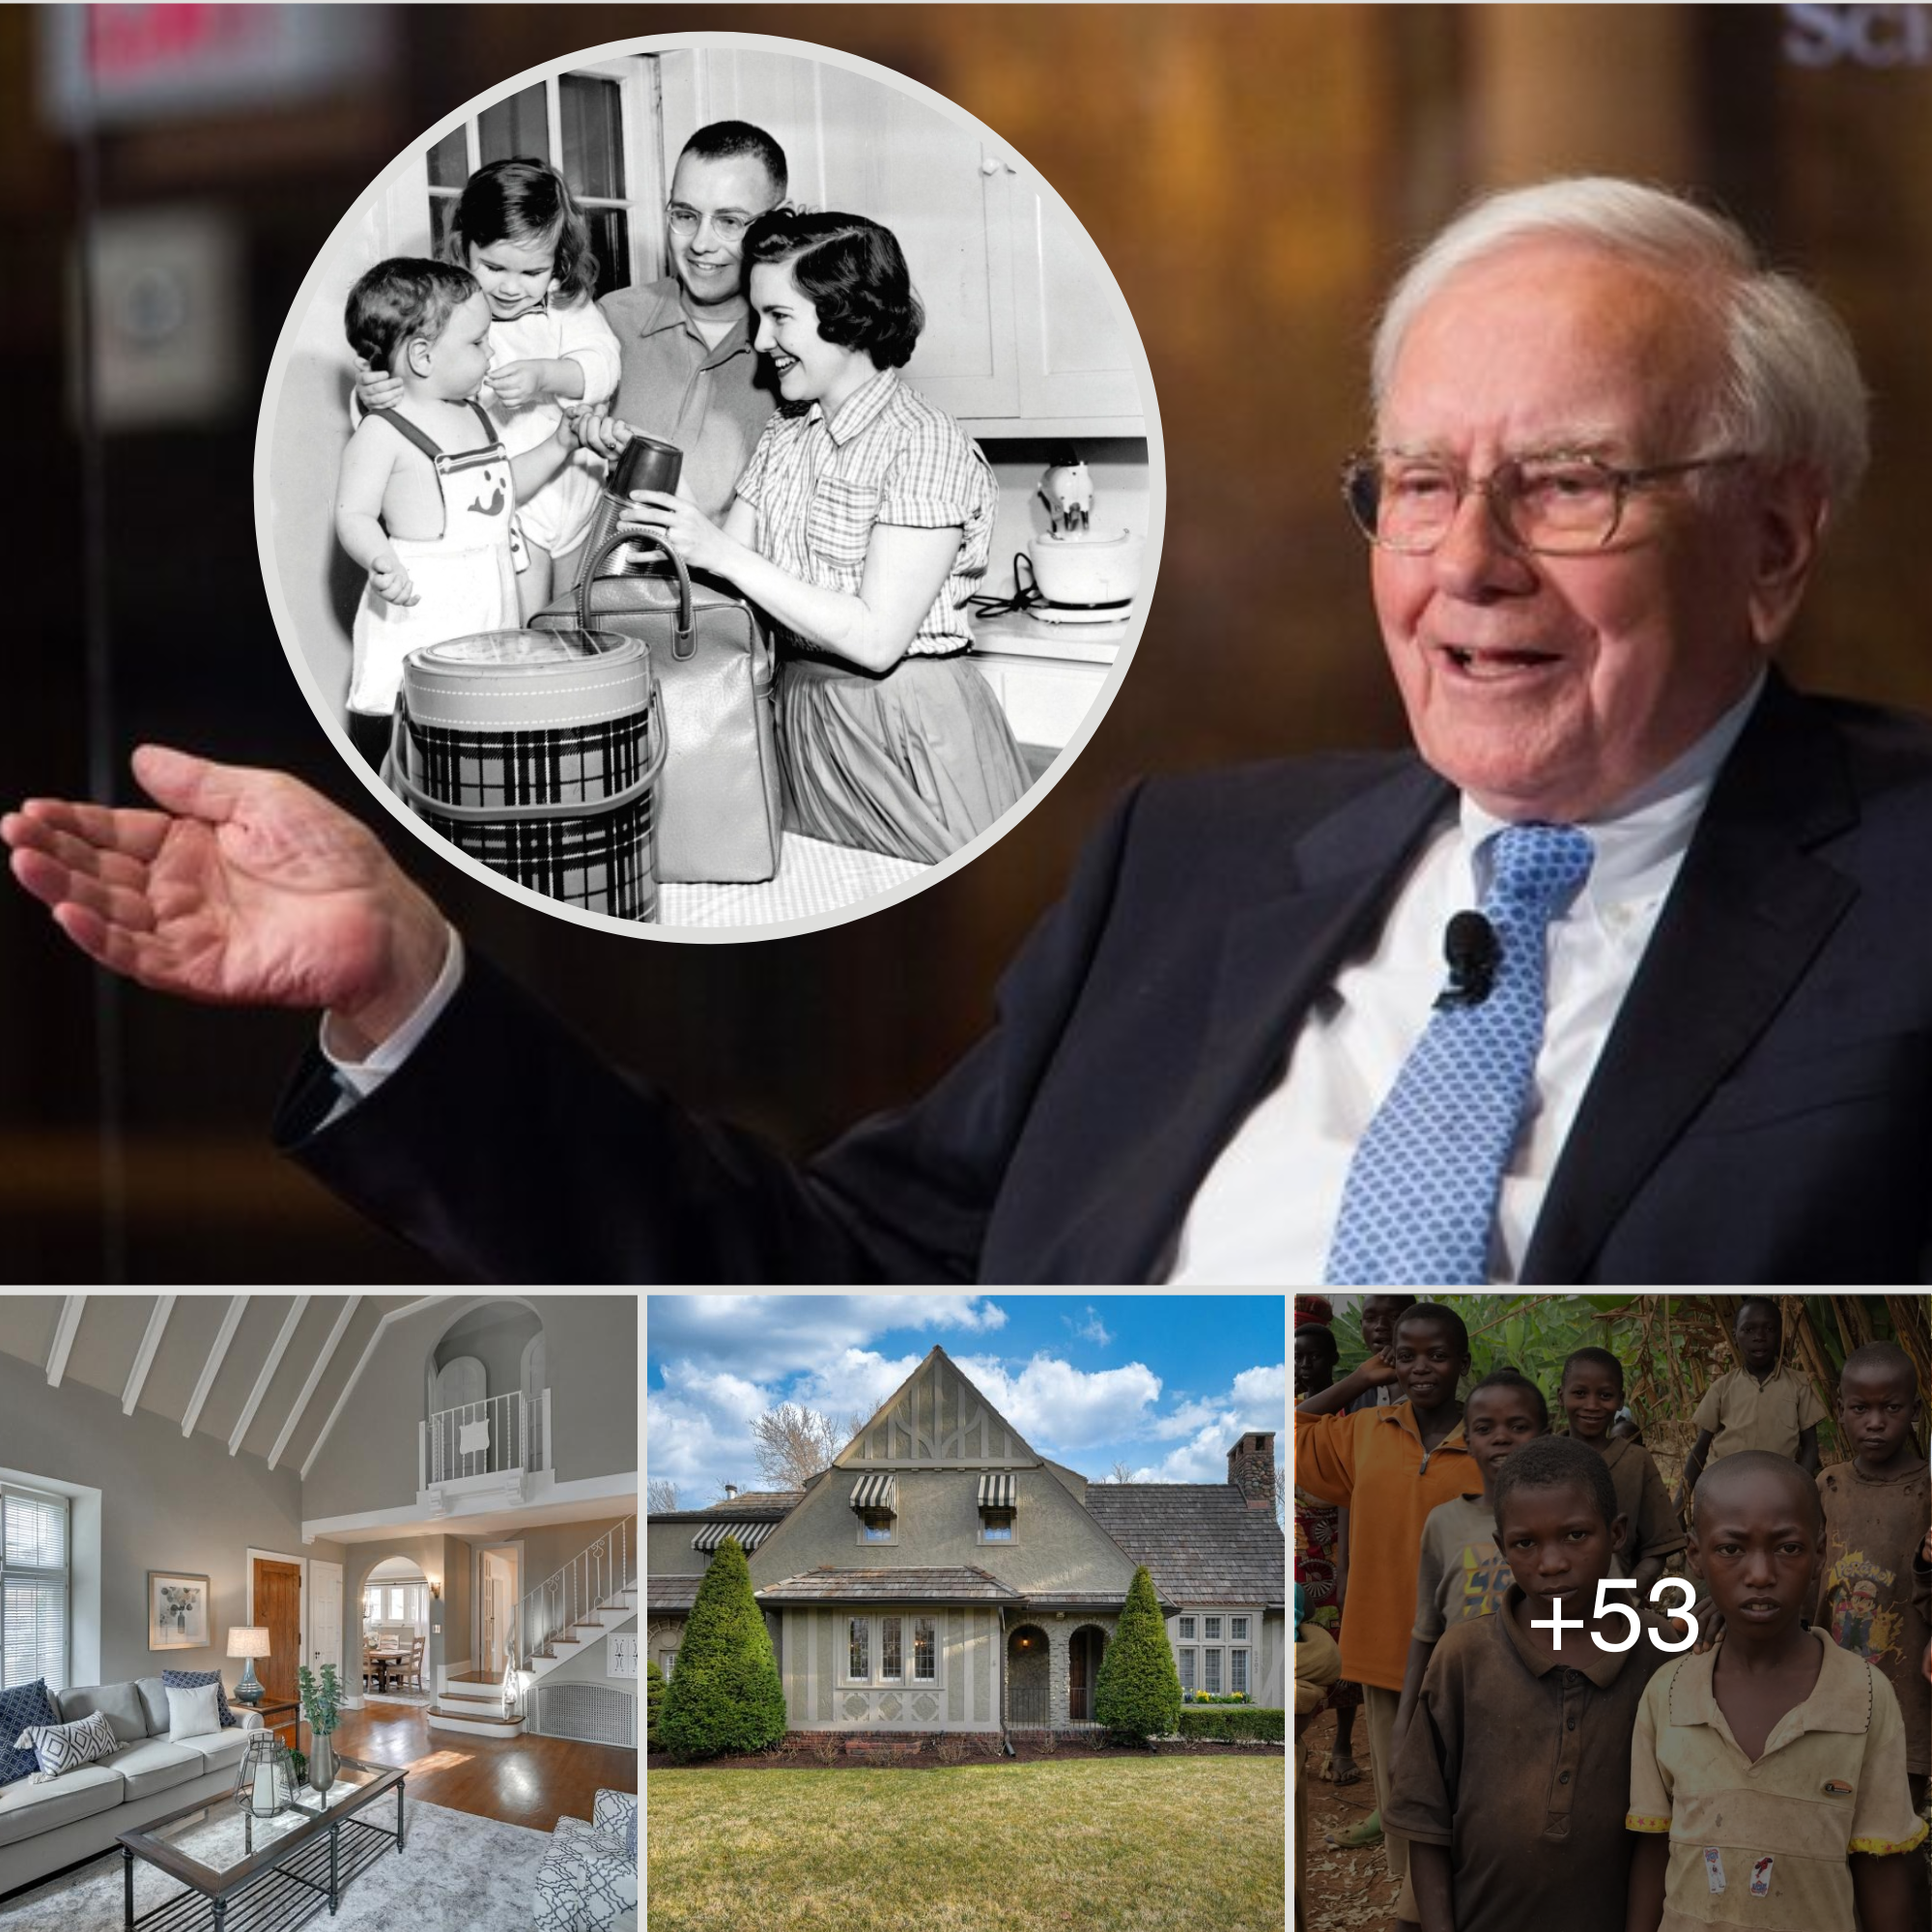 Billionaire Warren Buffett only lives in house worth 0.0001% of his net worth, the rest is used to help the poor